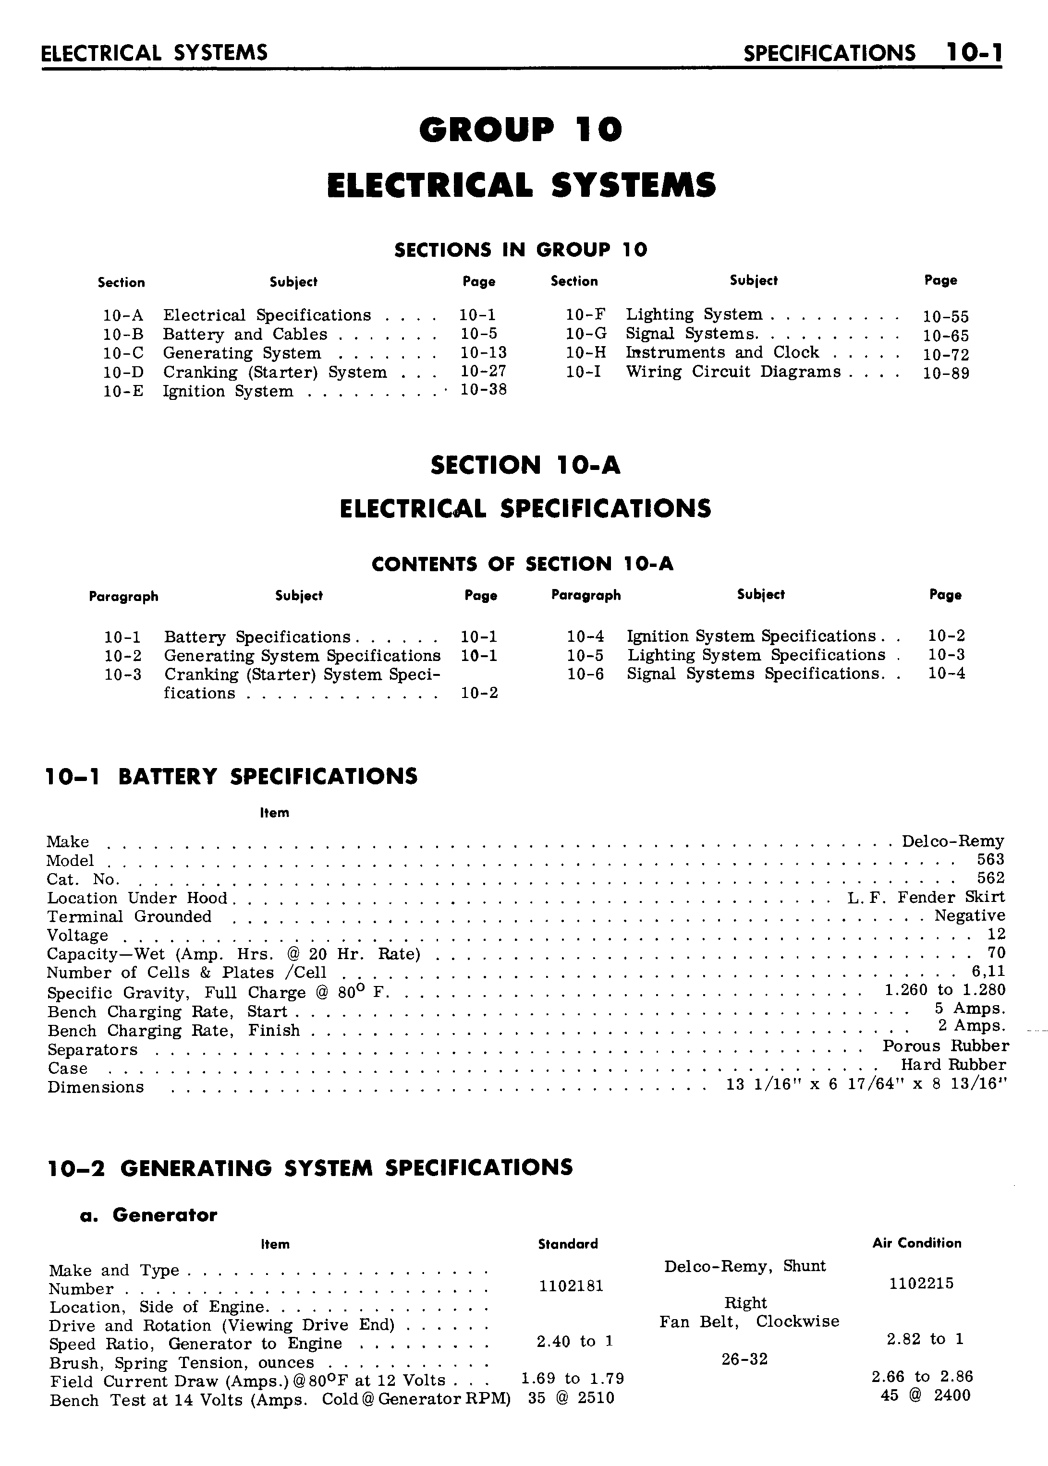 n_10 1961 Buick Shop Manual - Electrical Systems-001-001.jpg